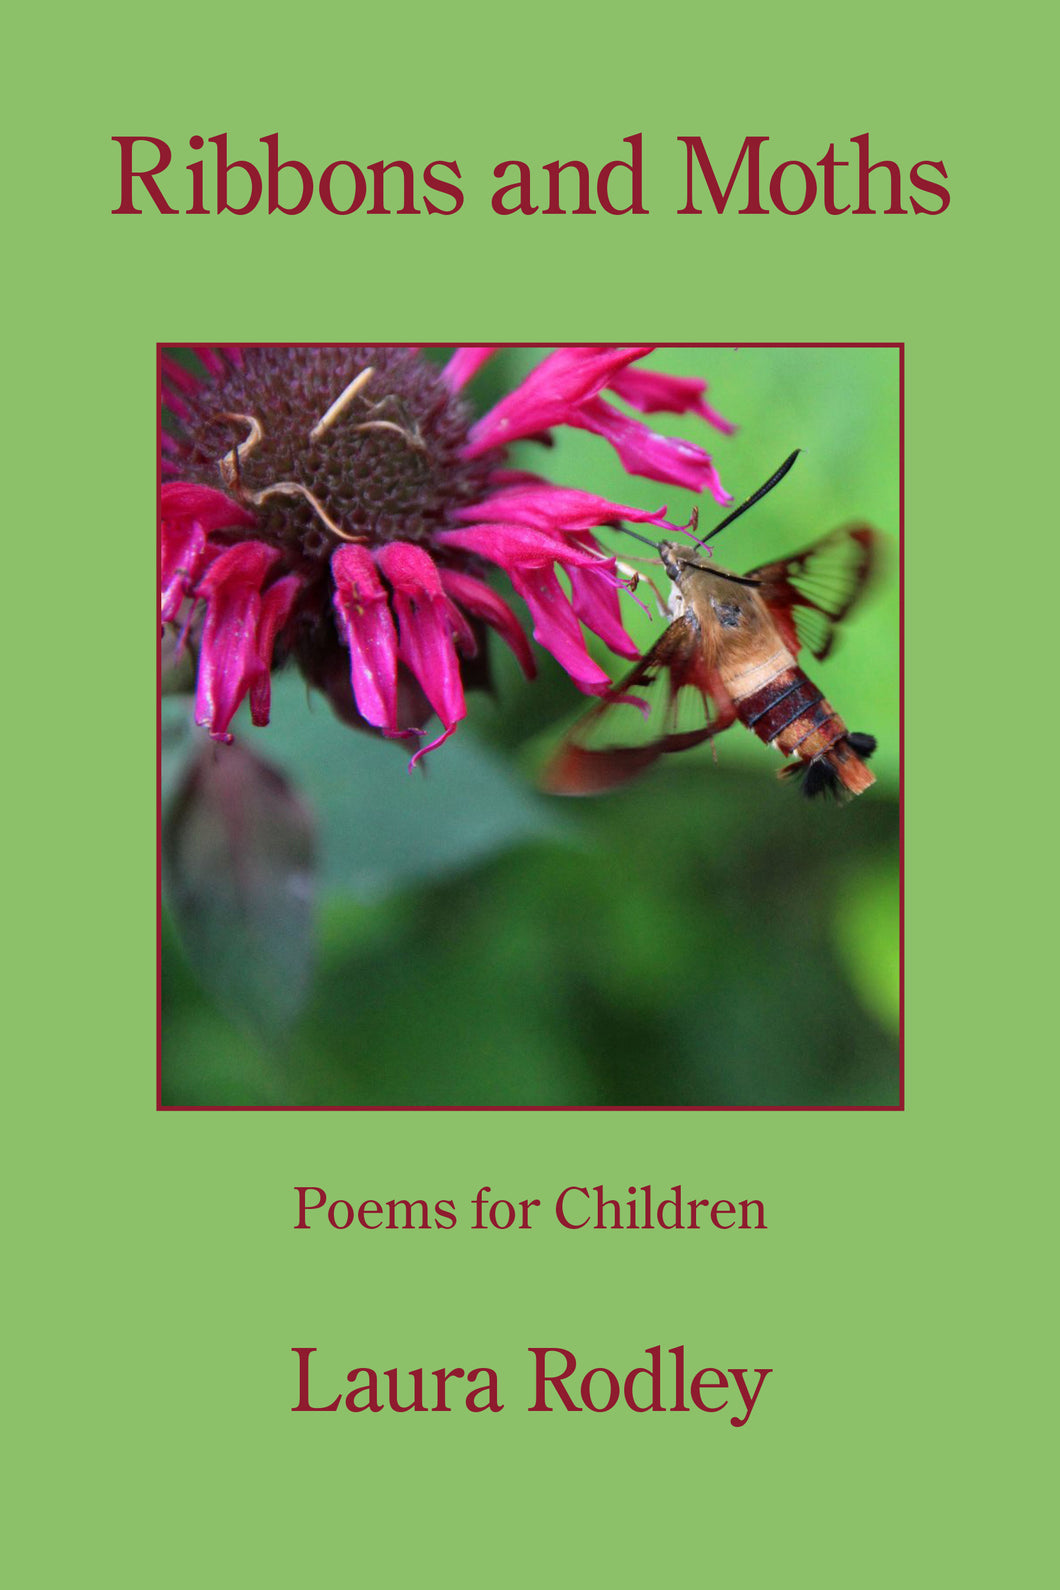 Ribbons and Moths: Poems for Children